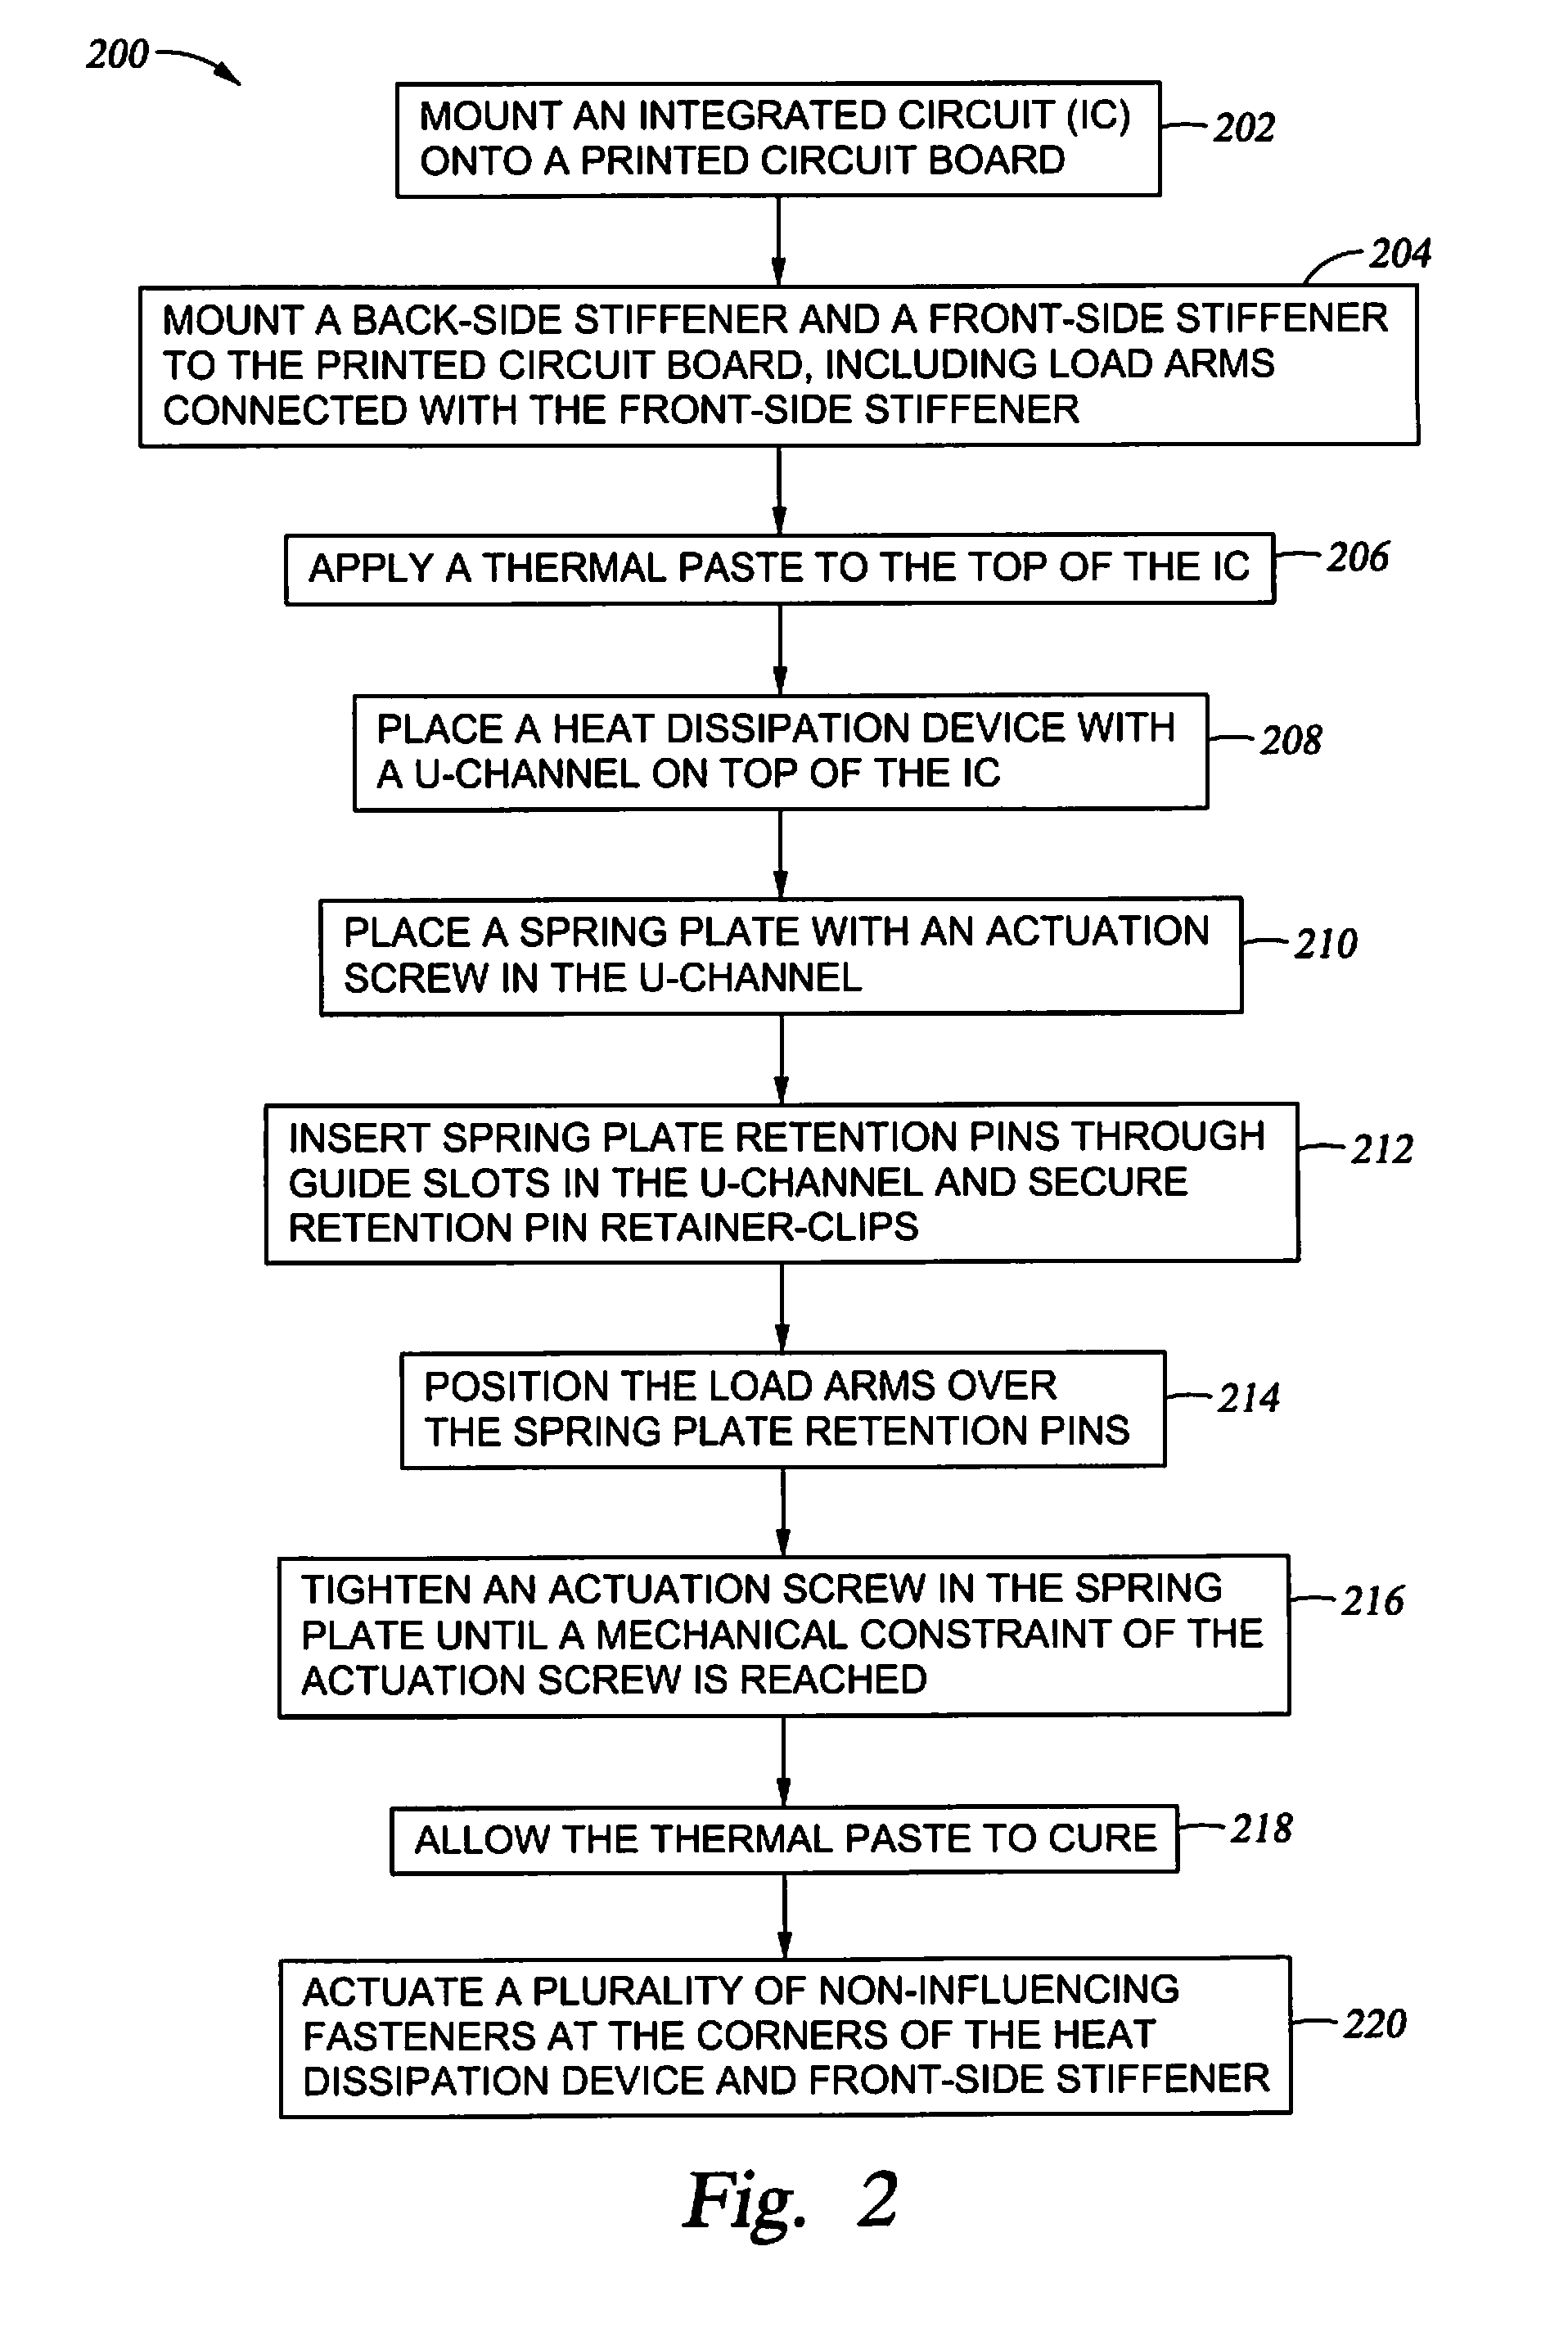 Heatsink Apparatus for Applying a Specified Compressive Force to an Integrated Circuit Device